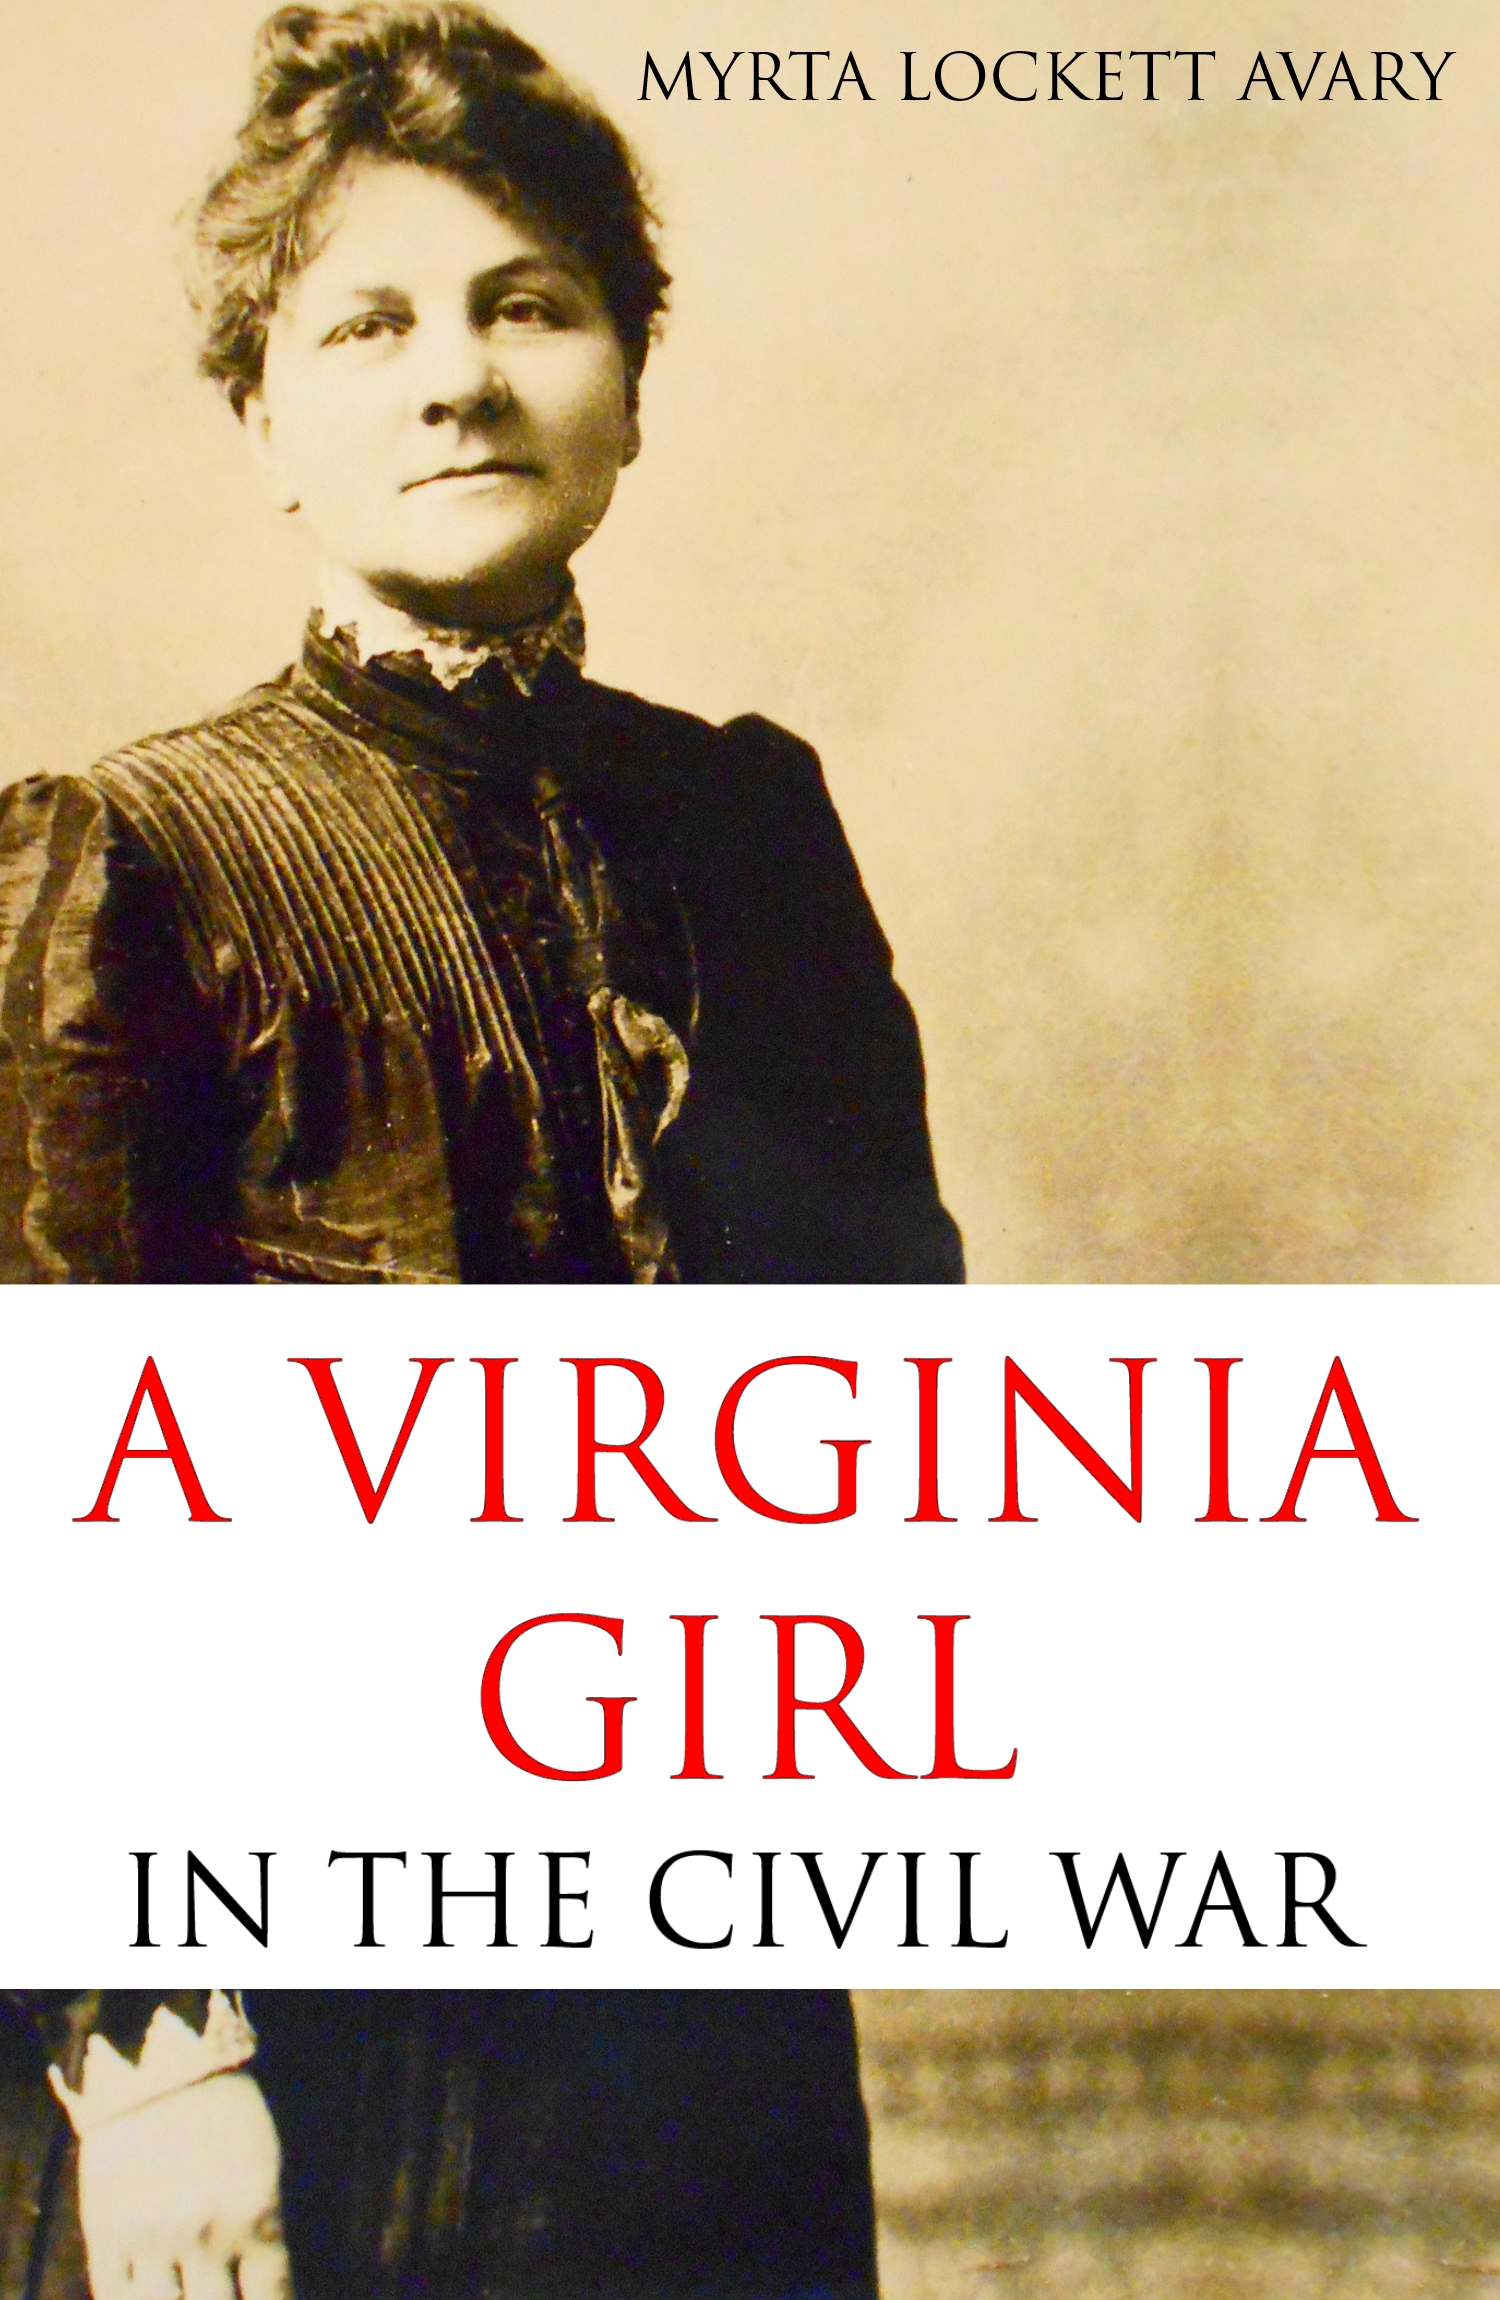 A VIRGINIA GIRL IN THE CIVIL WAR 1861-1865 BEING A RECORD OF THE ACTUAL - photo 1